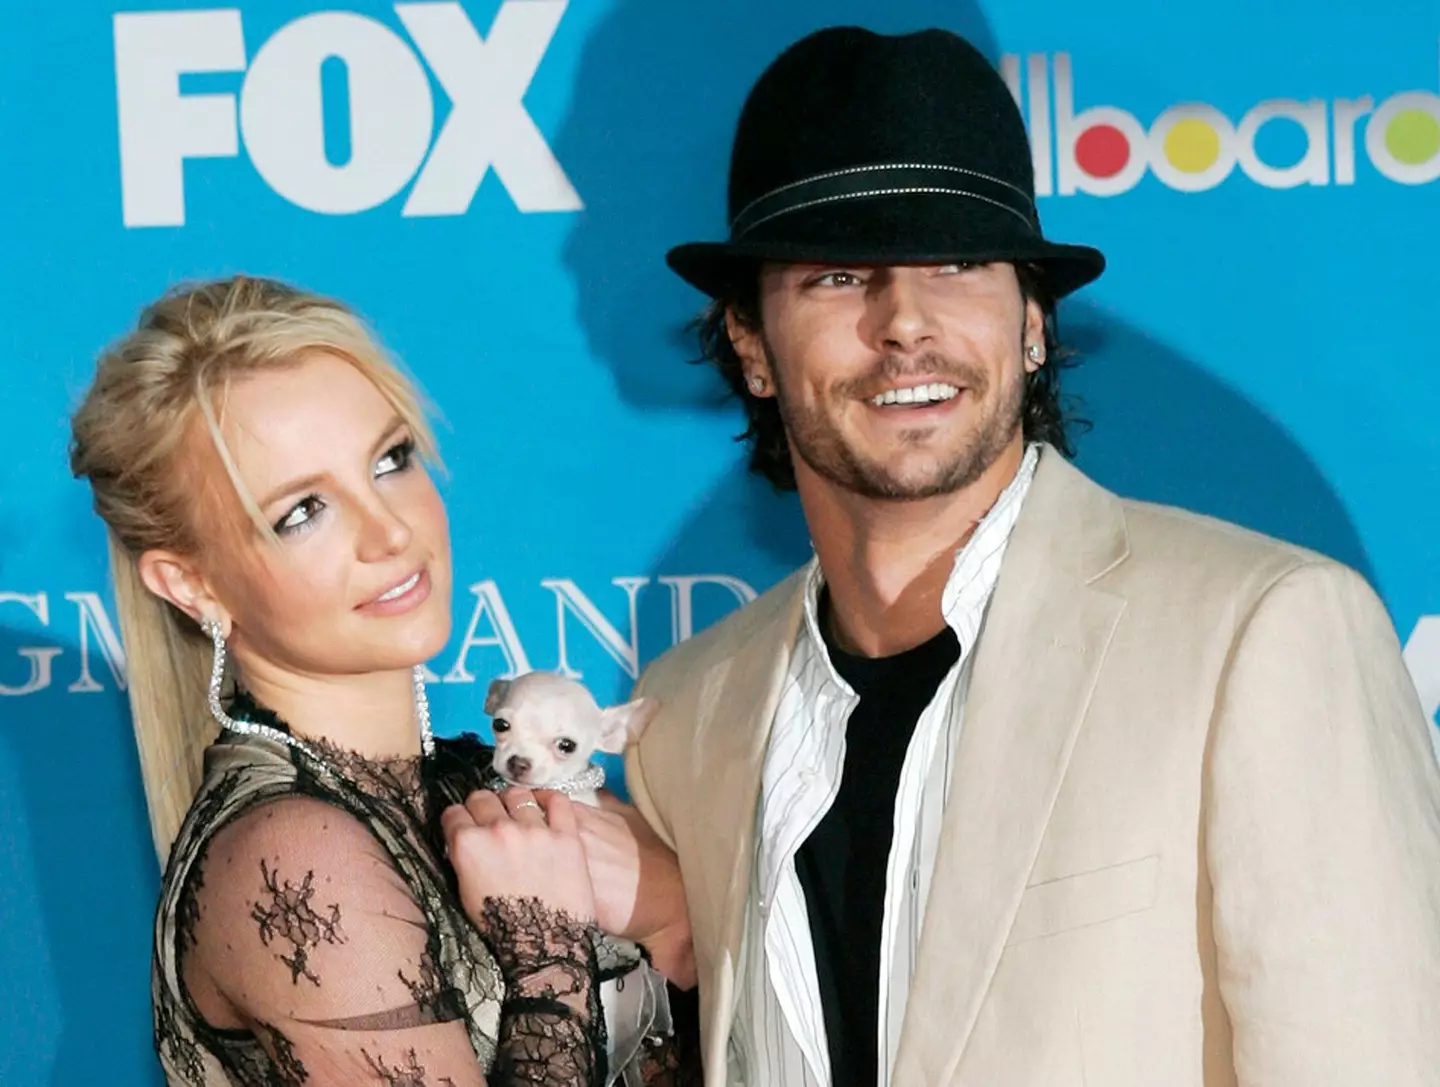 Kevin Federline publically claimed his sons were not seeing their mum, Britney Spears, at the moment.